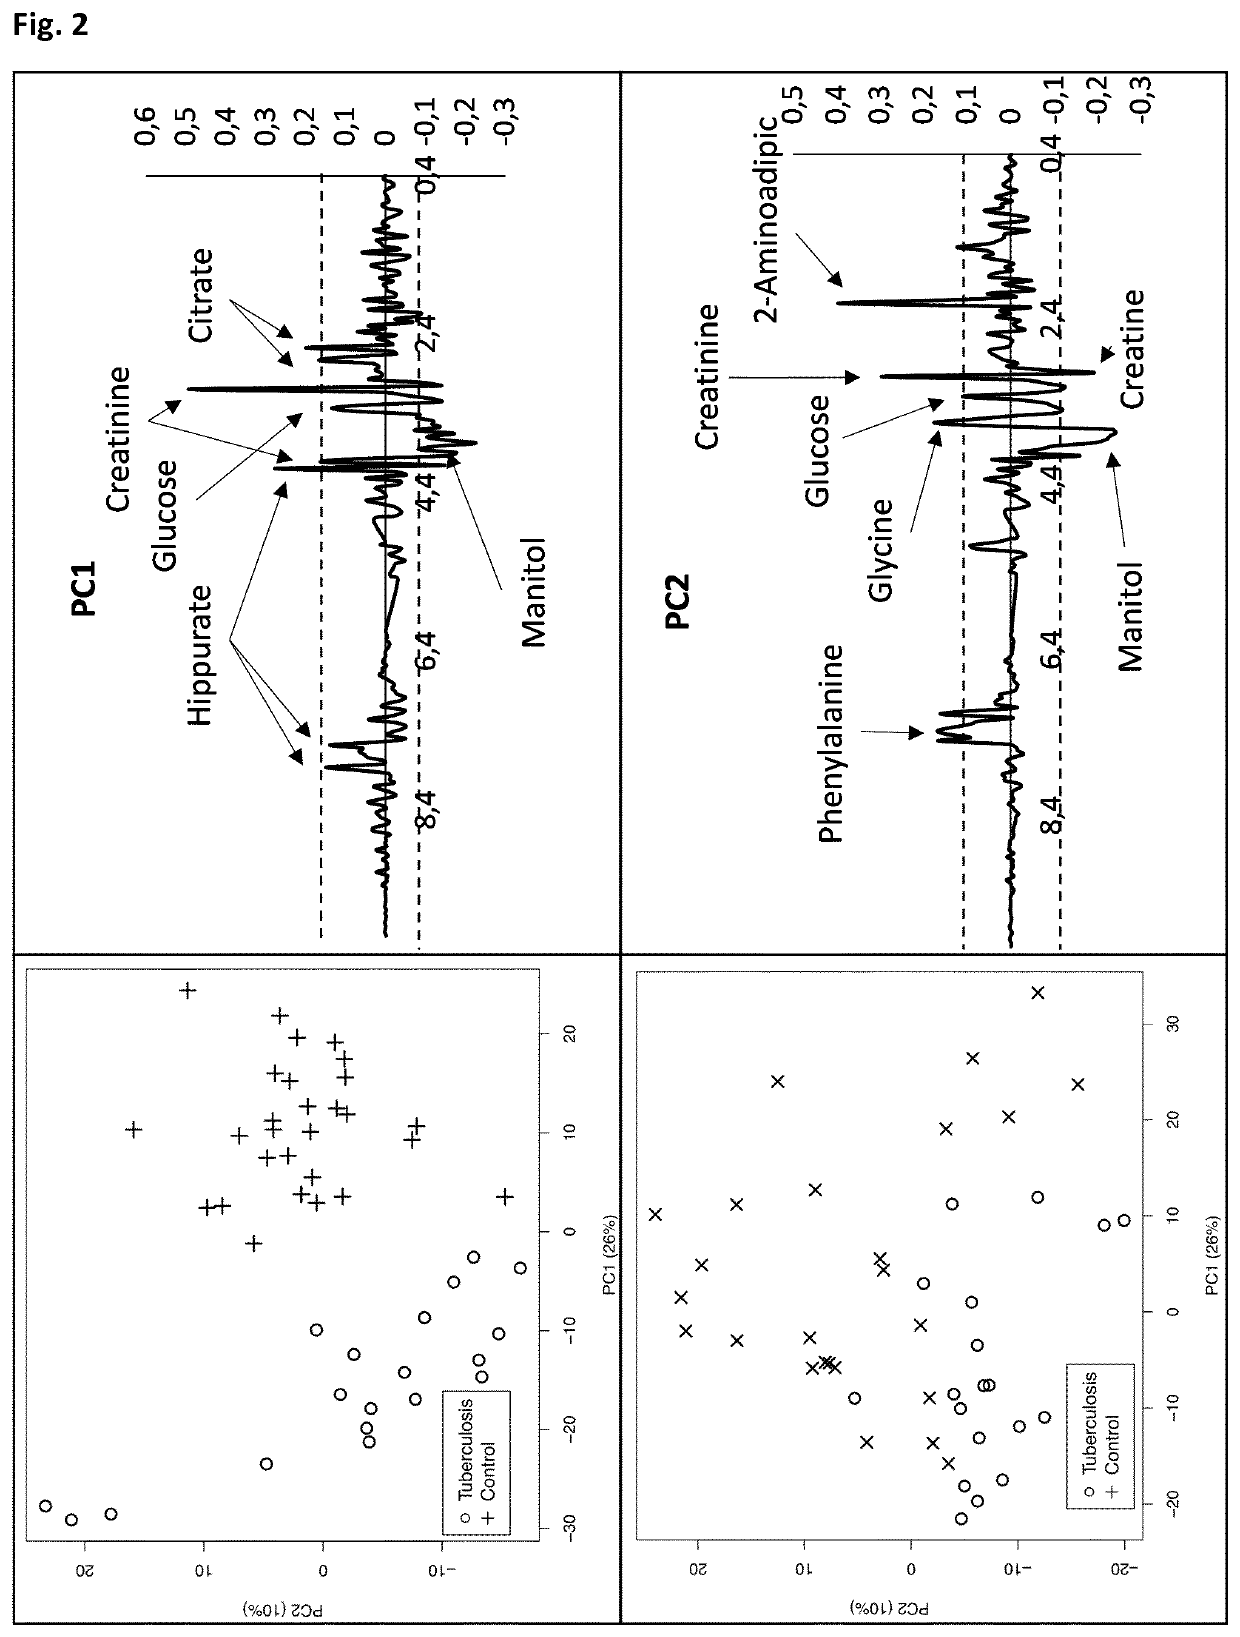 Identification of metabolomic signatures in urine samples for tuberculosis diagnosis